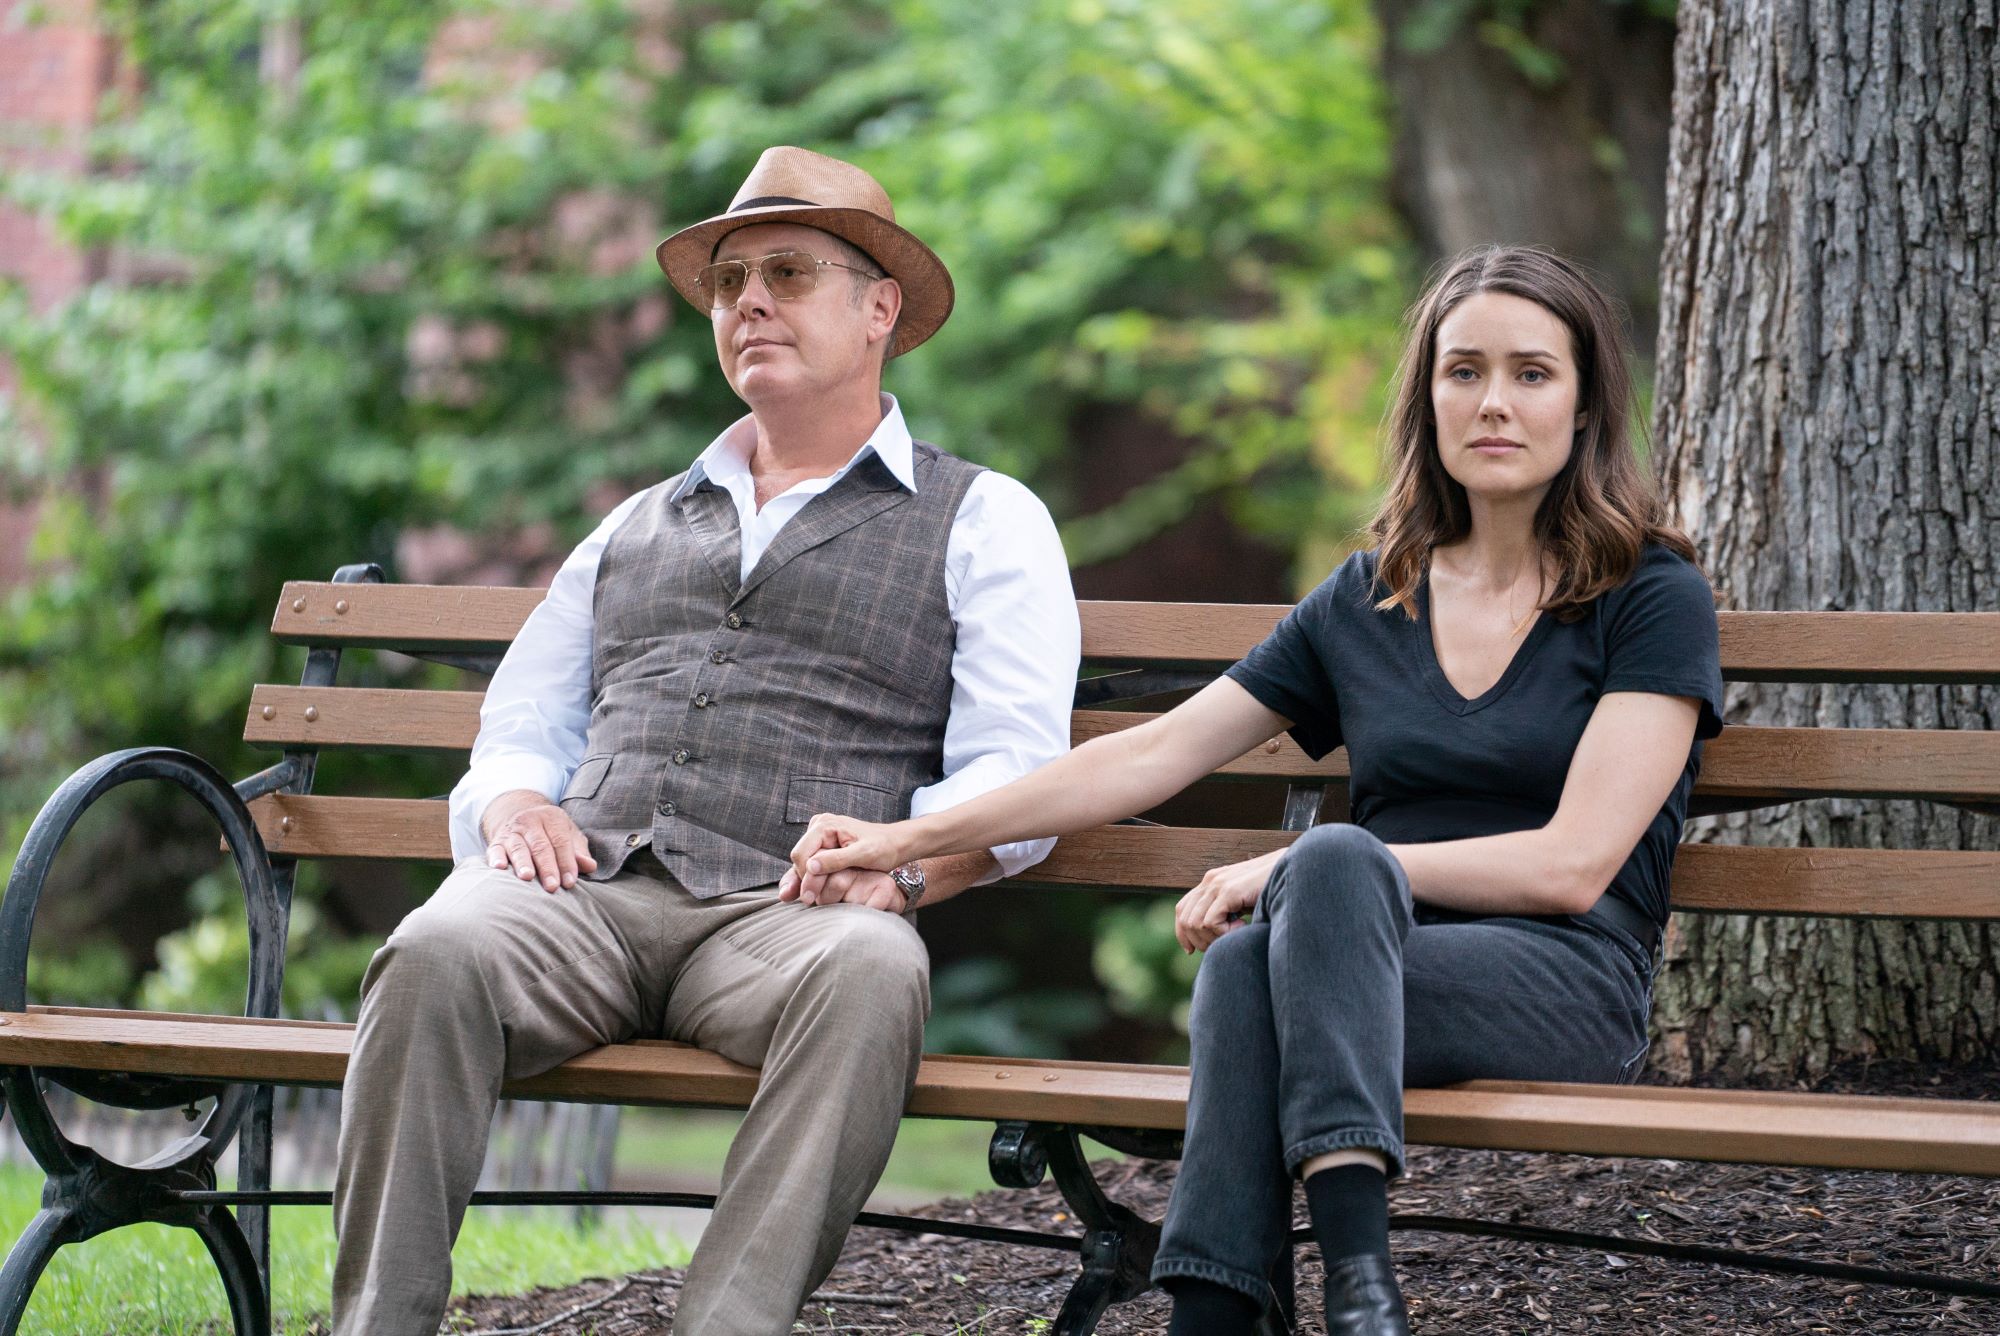 'The Blacklist' Season 9 stars James Spader and Megan Boone, in character as Red and Liz, sit on a bench in a park holding hands. Red wears a gray vest over a white button-up shirt and tan pants and wears a light brown fedora and glasses. Liz wears a black t-shirt and dark gray jeans.